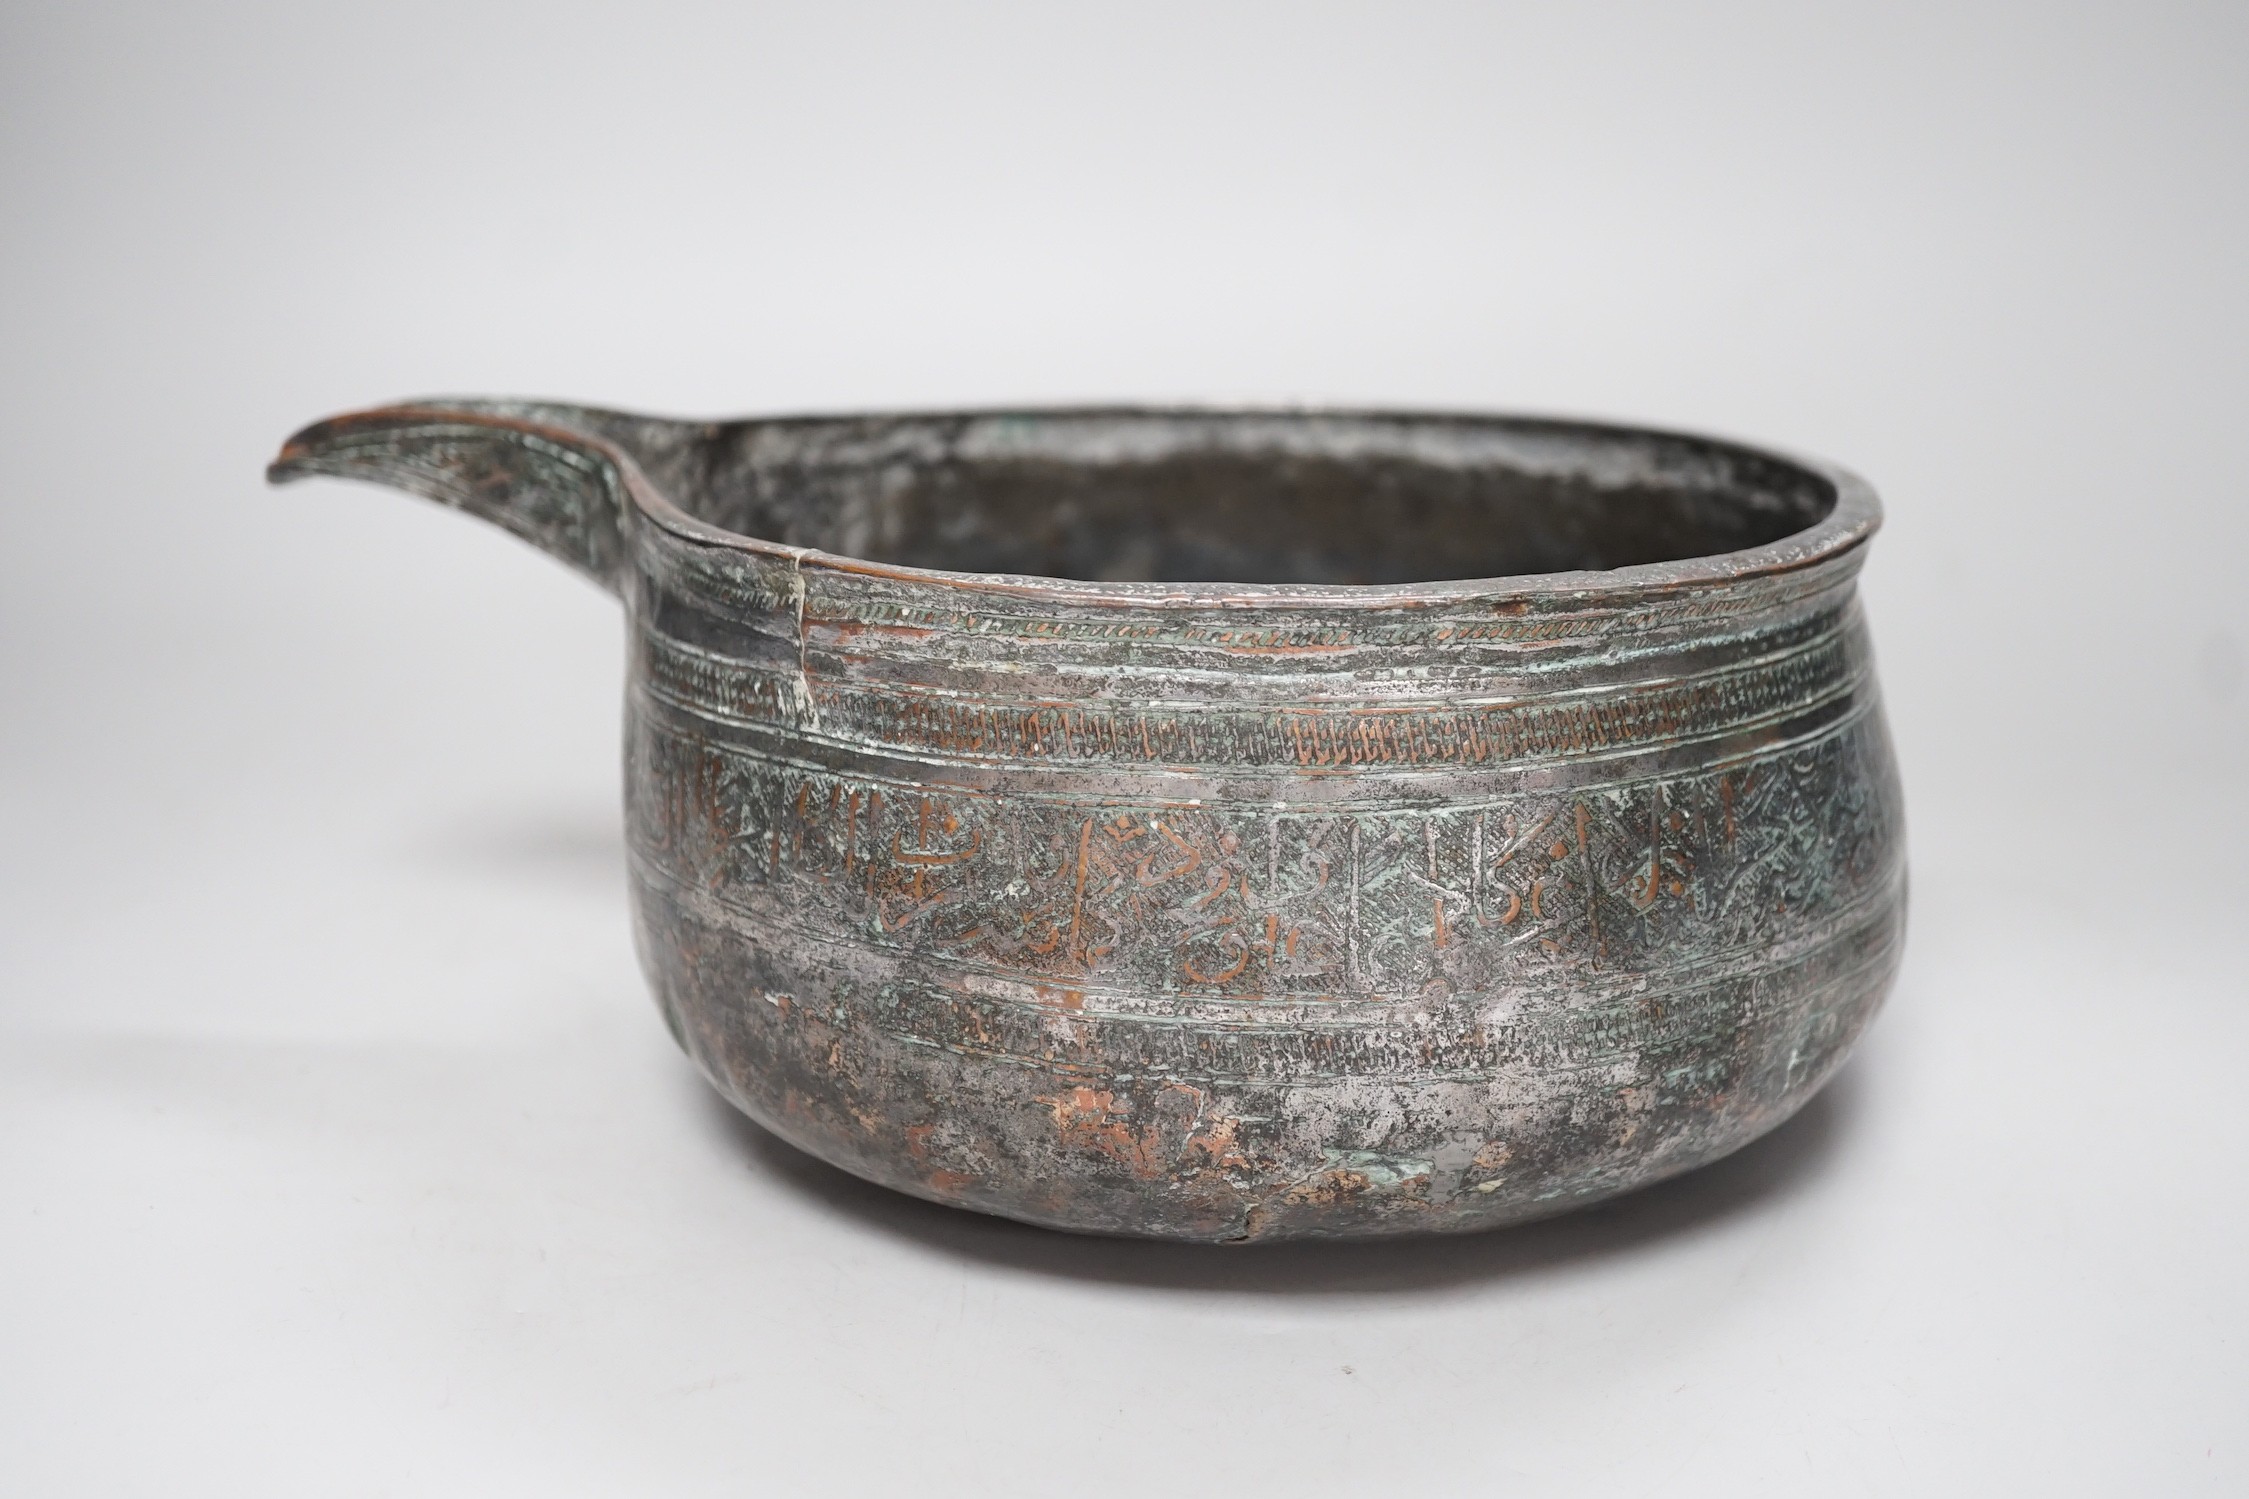 An early Islamic tinned copper pouring vessel, Egypt or Syria, 26cm long, Kufic inscriptions